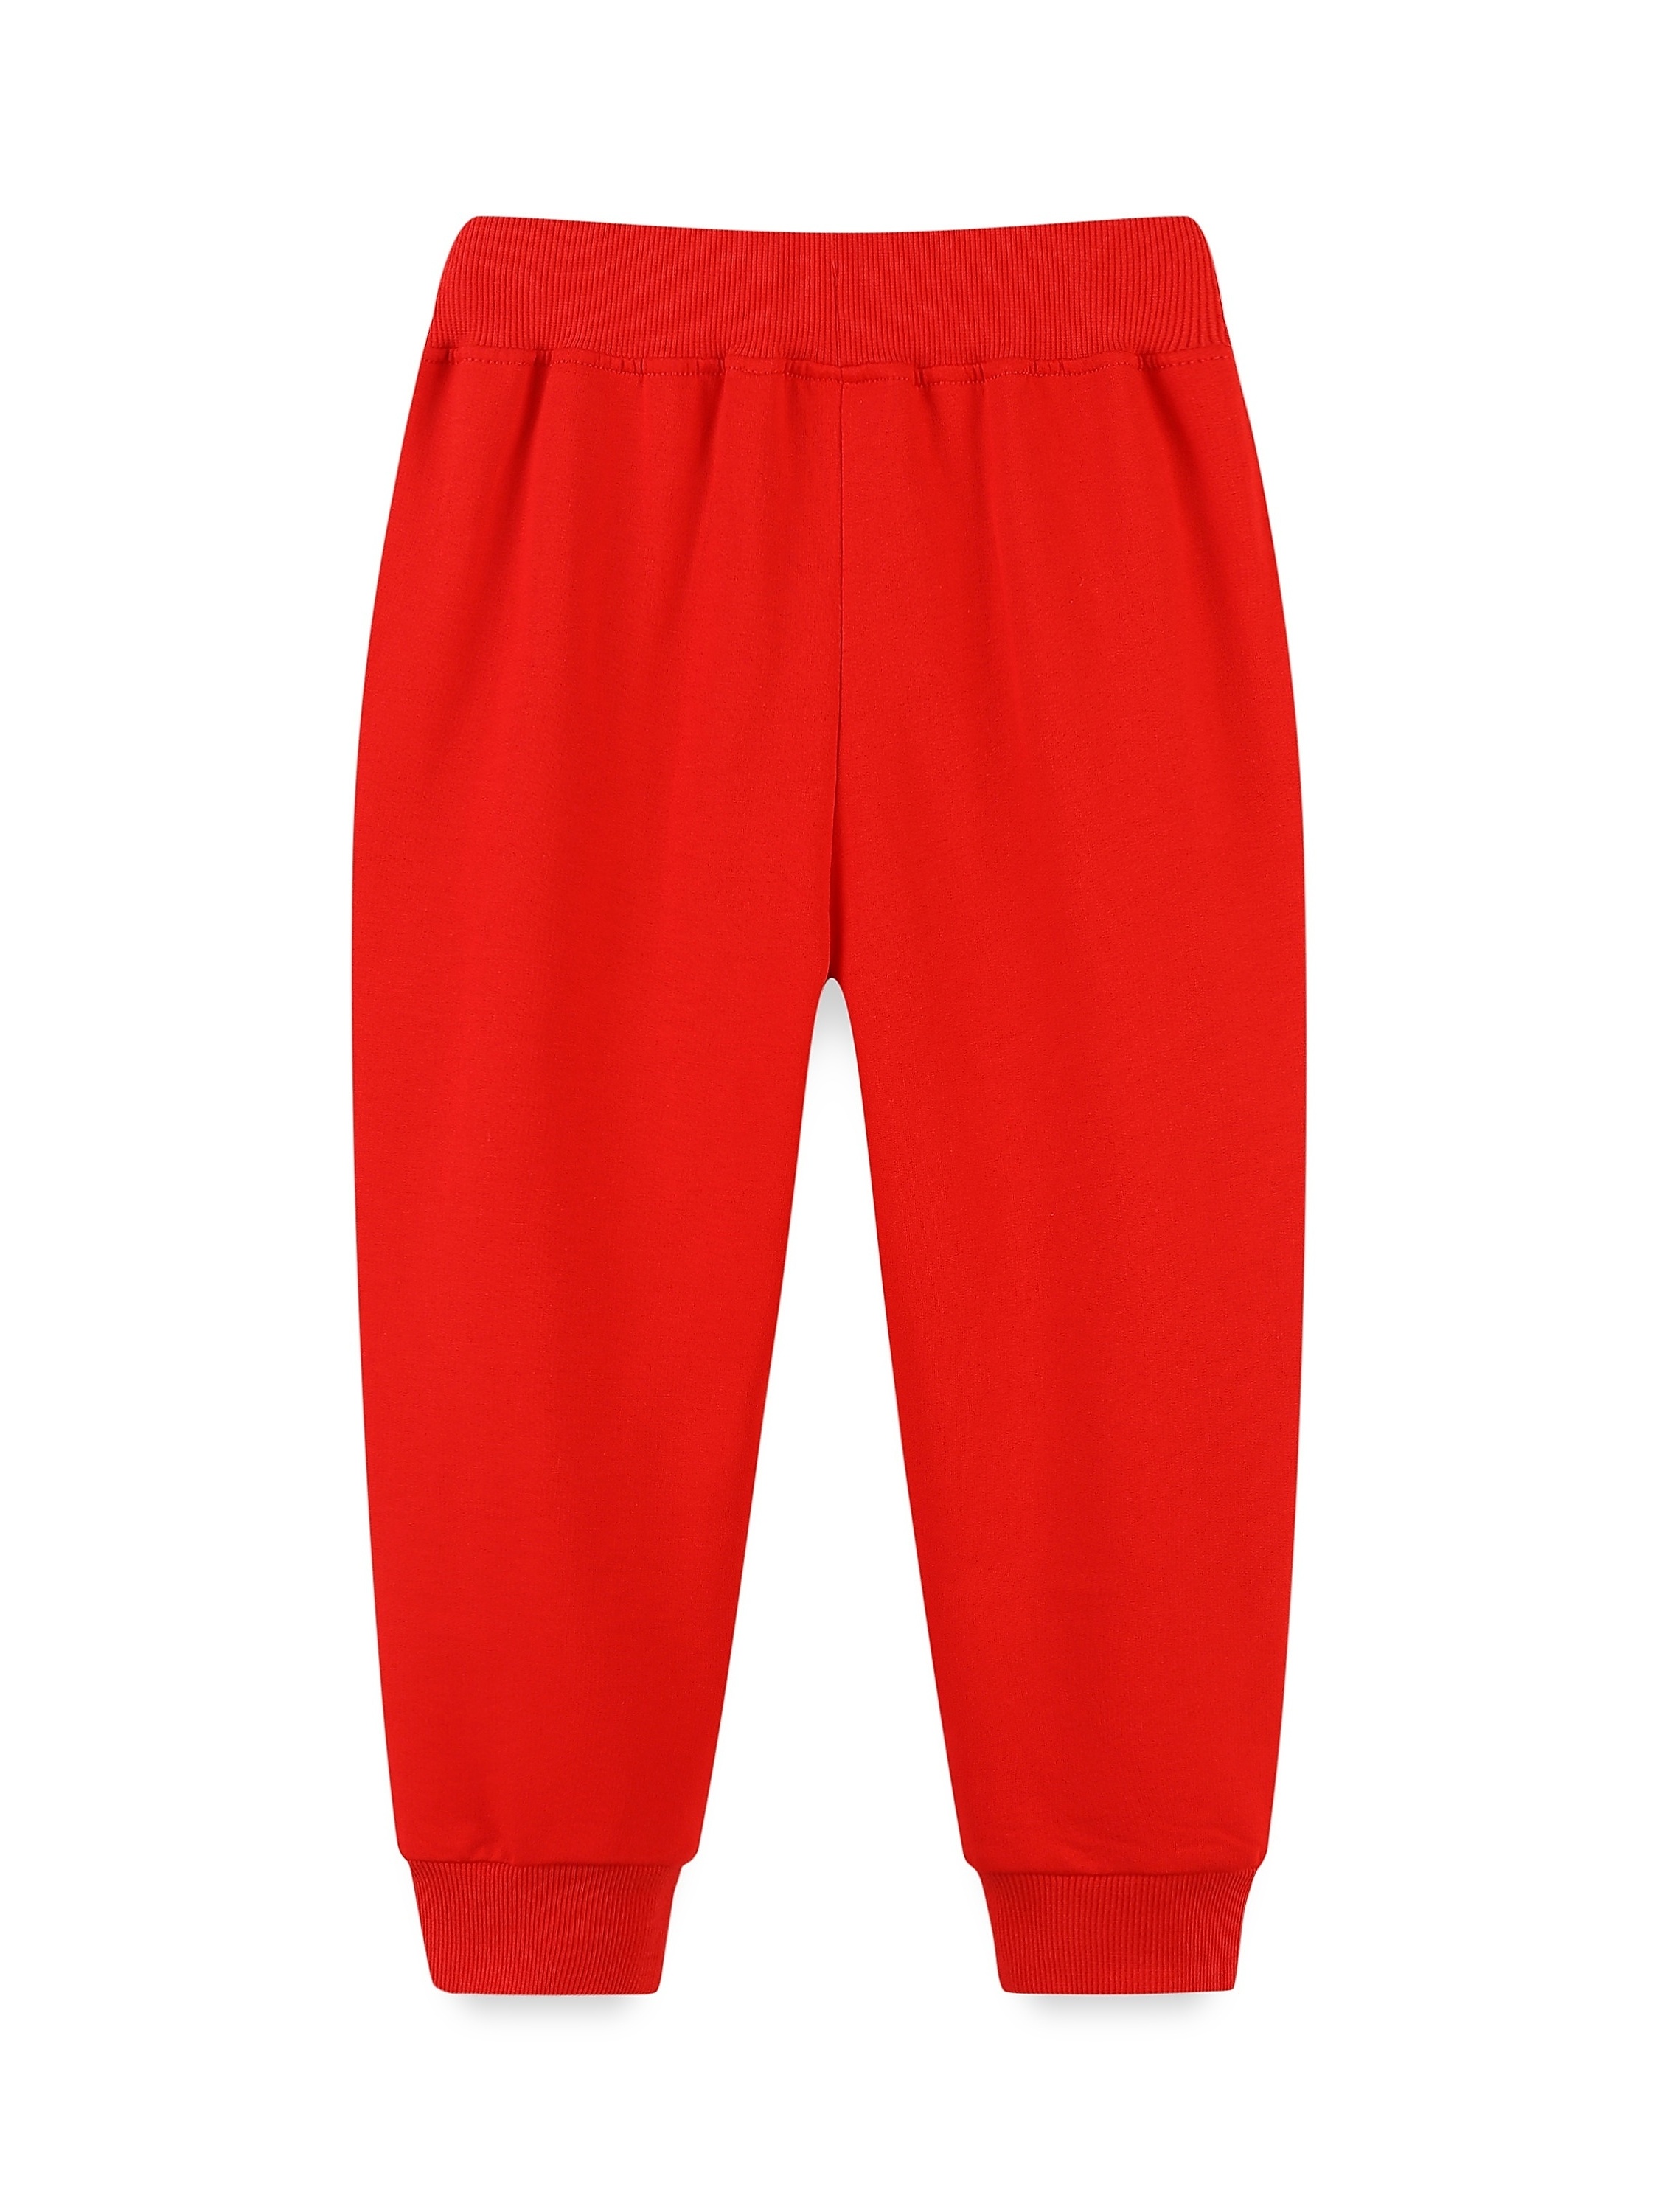 Boys Casual Solid Comfortable Active Sweatpants、breathable Jogger